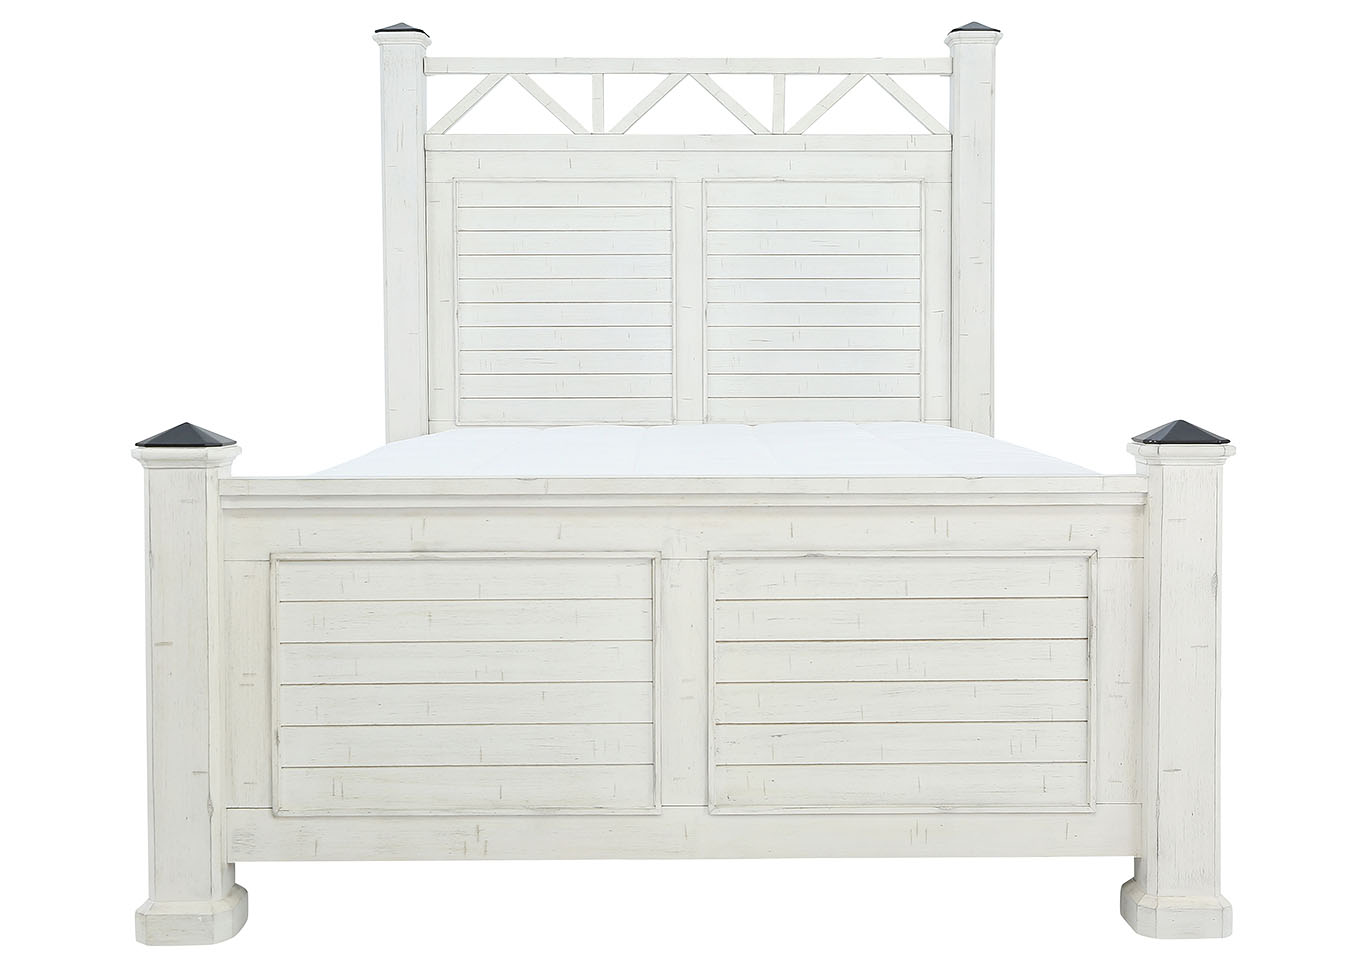 BLANCHE QUEEN POSTER BED,LIFESTYLE FURNITURE